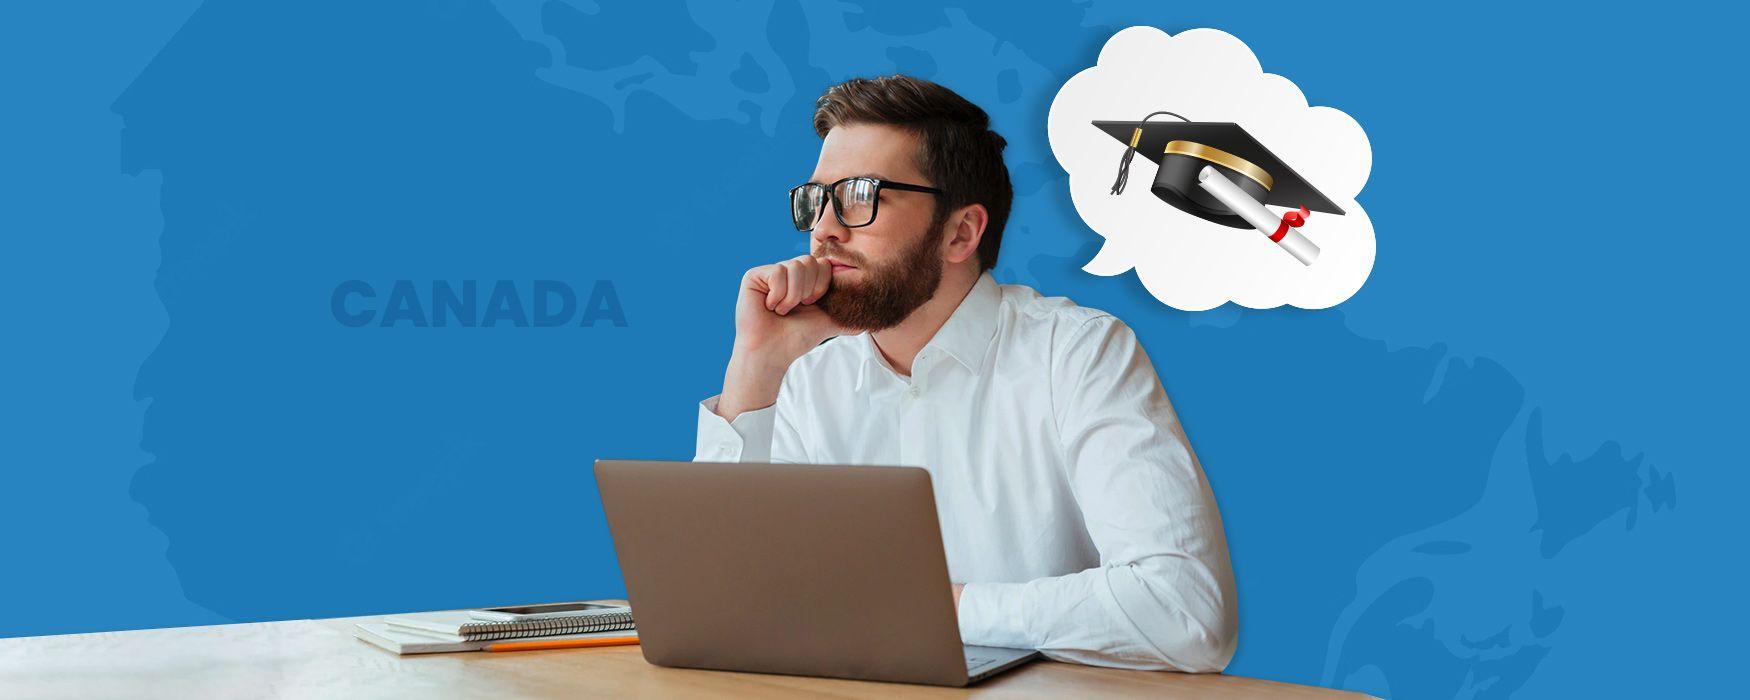 how to apply phd in canada